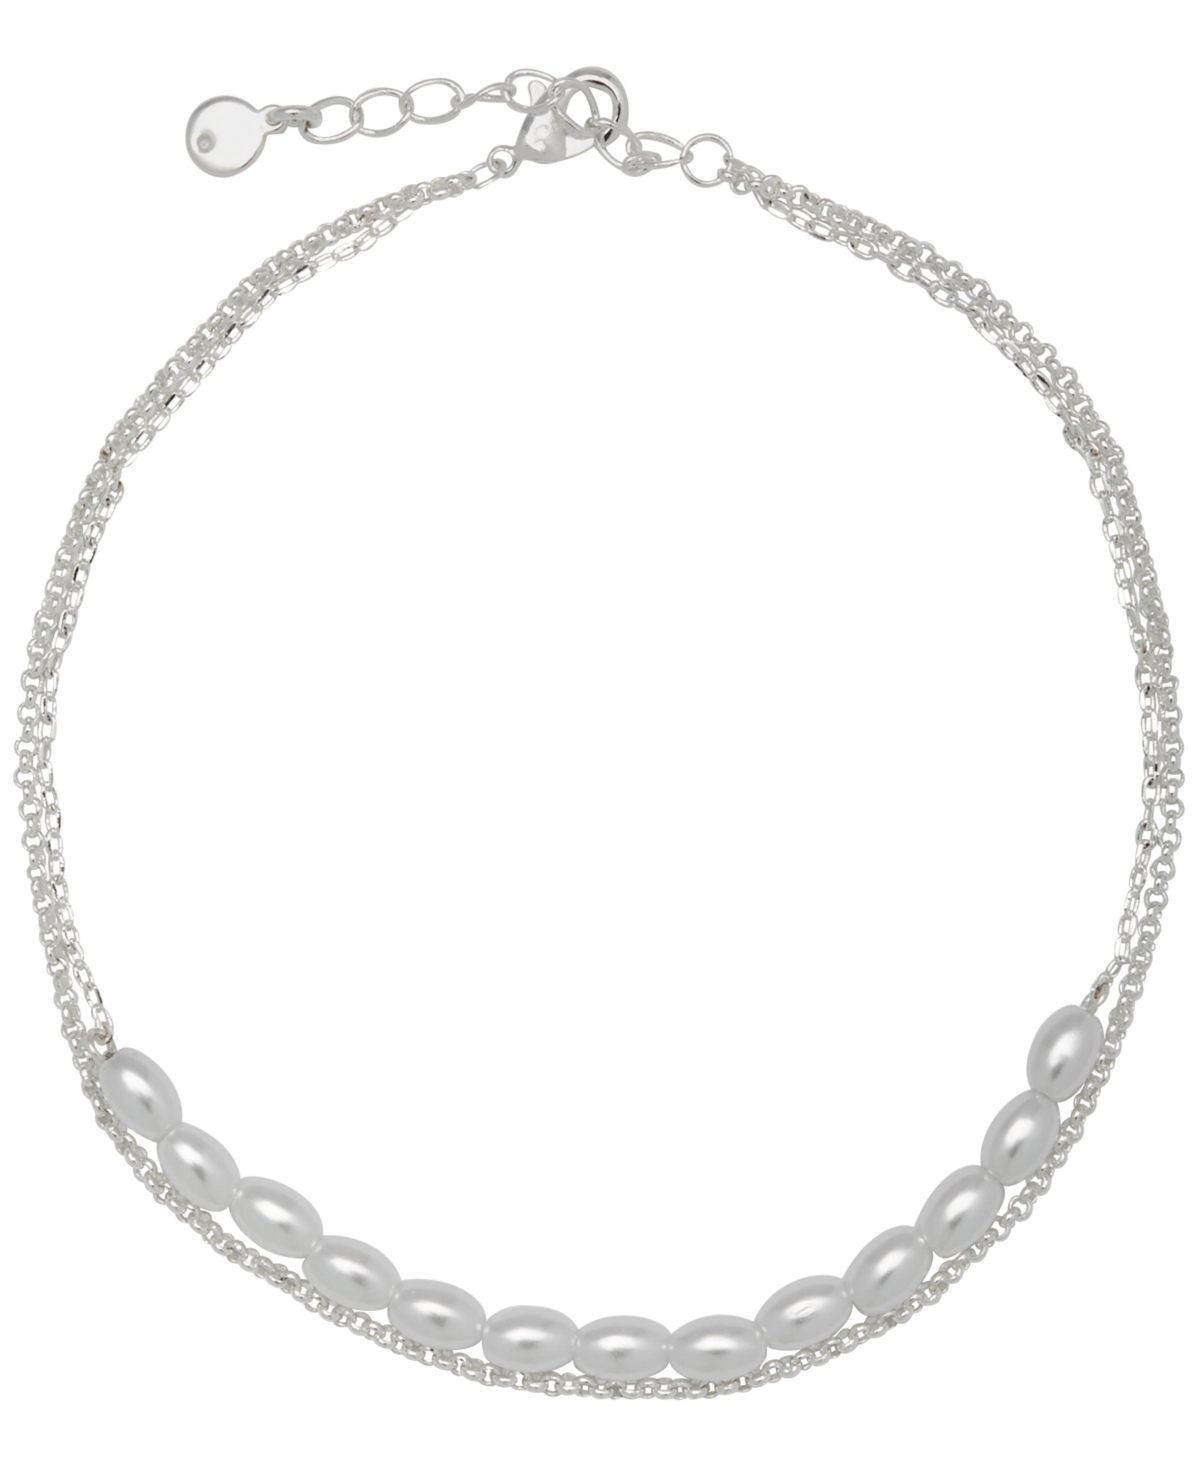 Women's Double Strand Imitation Pearl Anklet - Fine Silver Plated